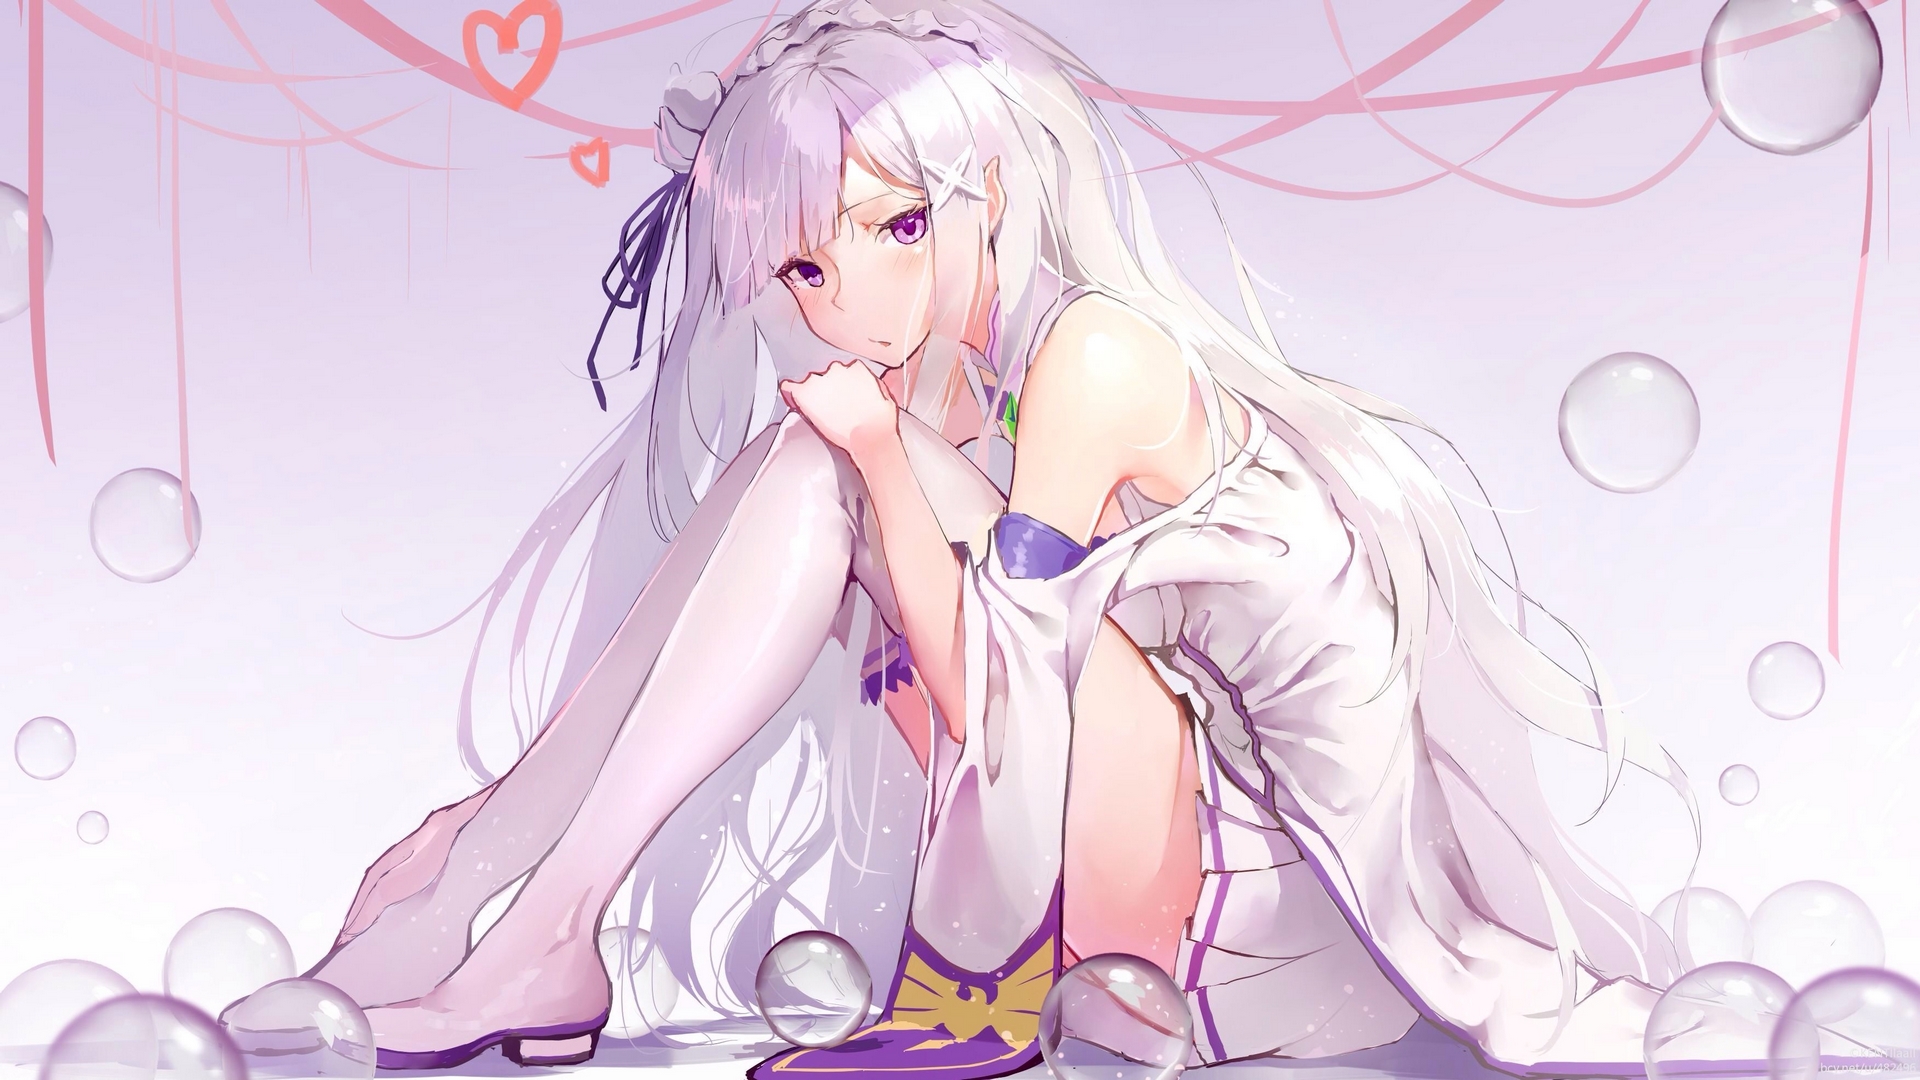 Wallpaper / pretty, white hair, beautiful, ribbons, woman, sweet, anime, beauty, anime girl, long hair, female, lovely, soft, hearts, girl, purple, lady, white free download